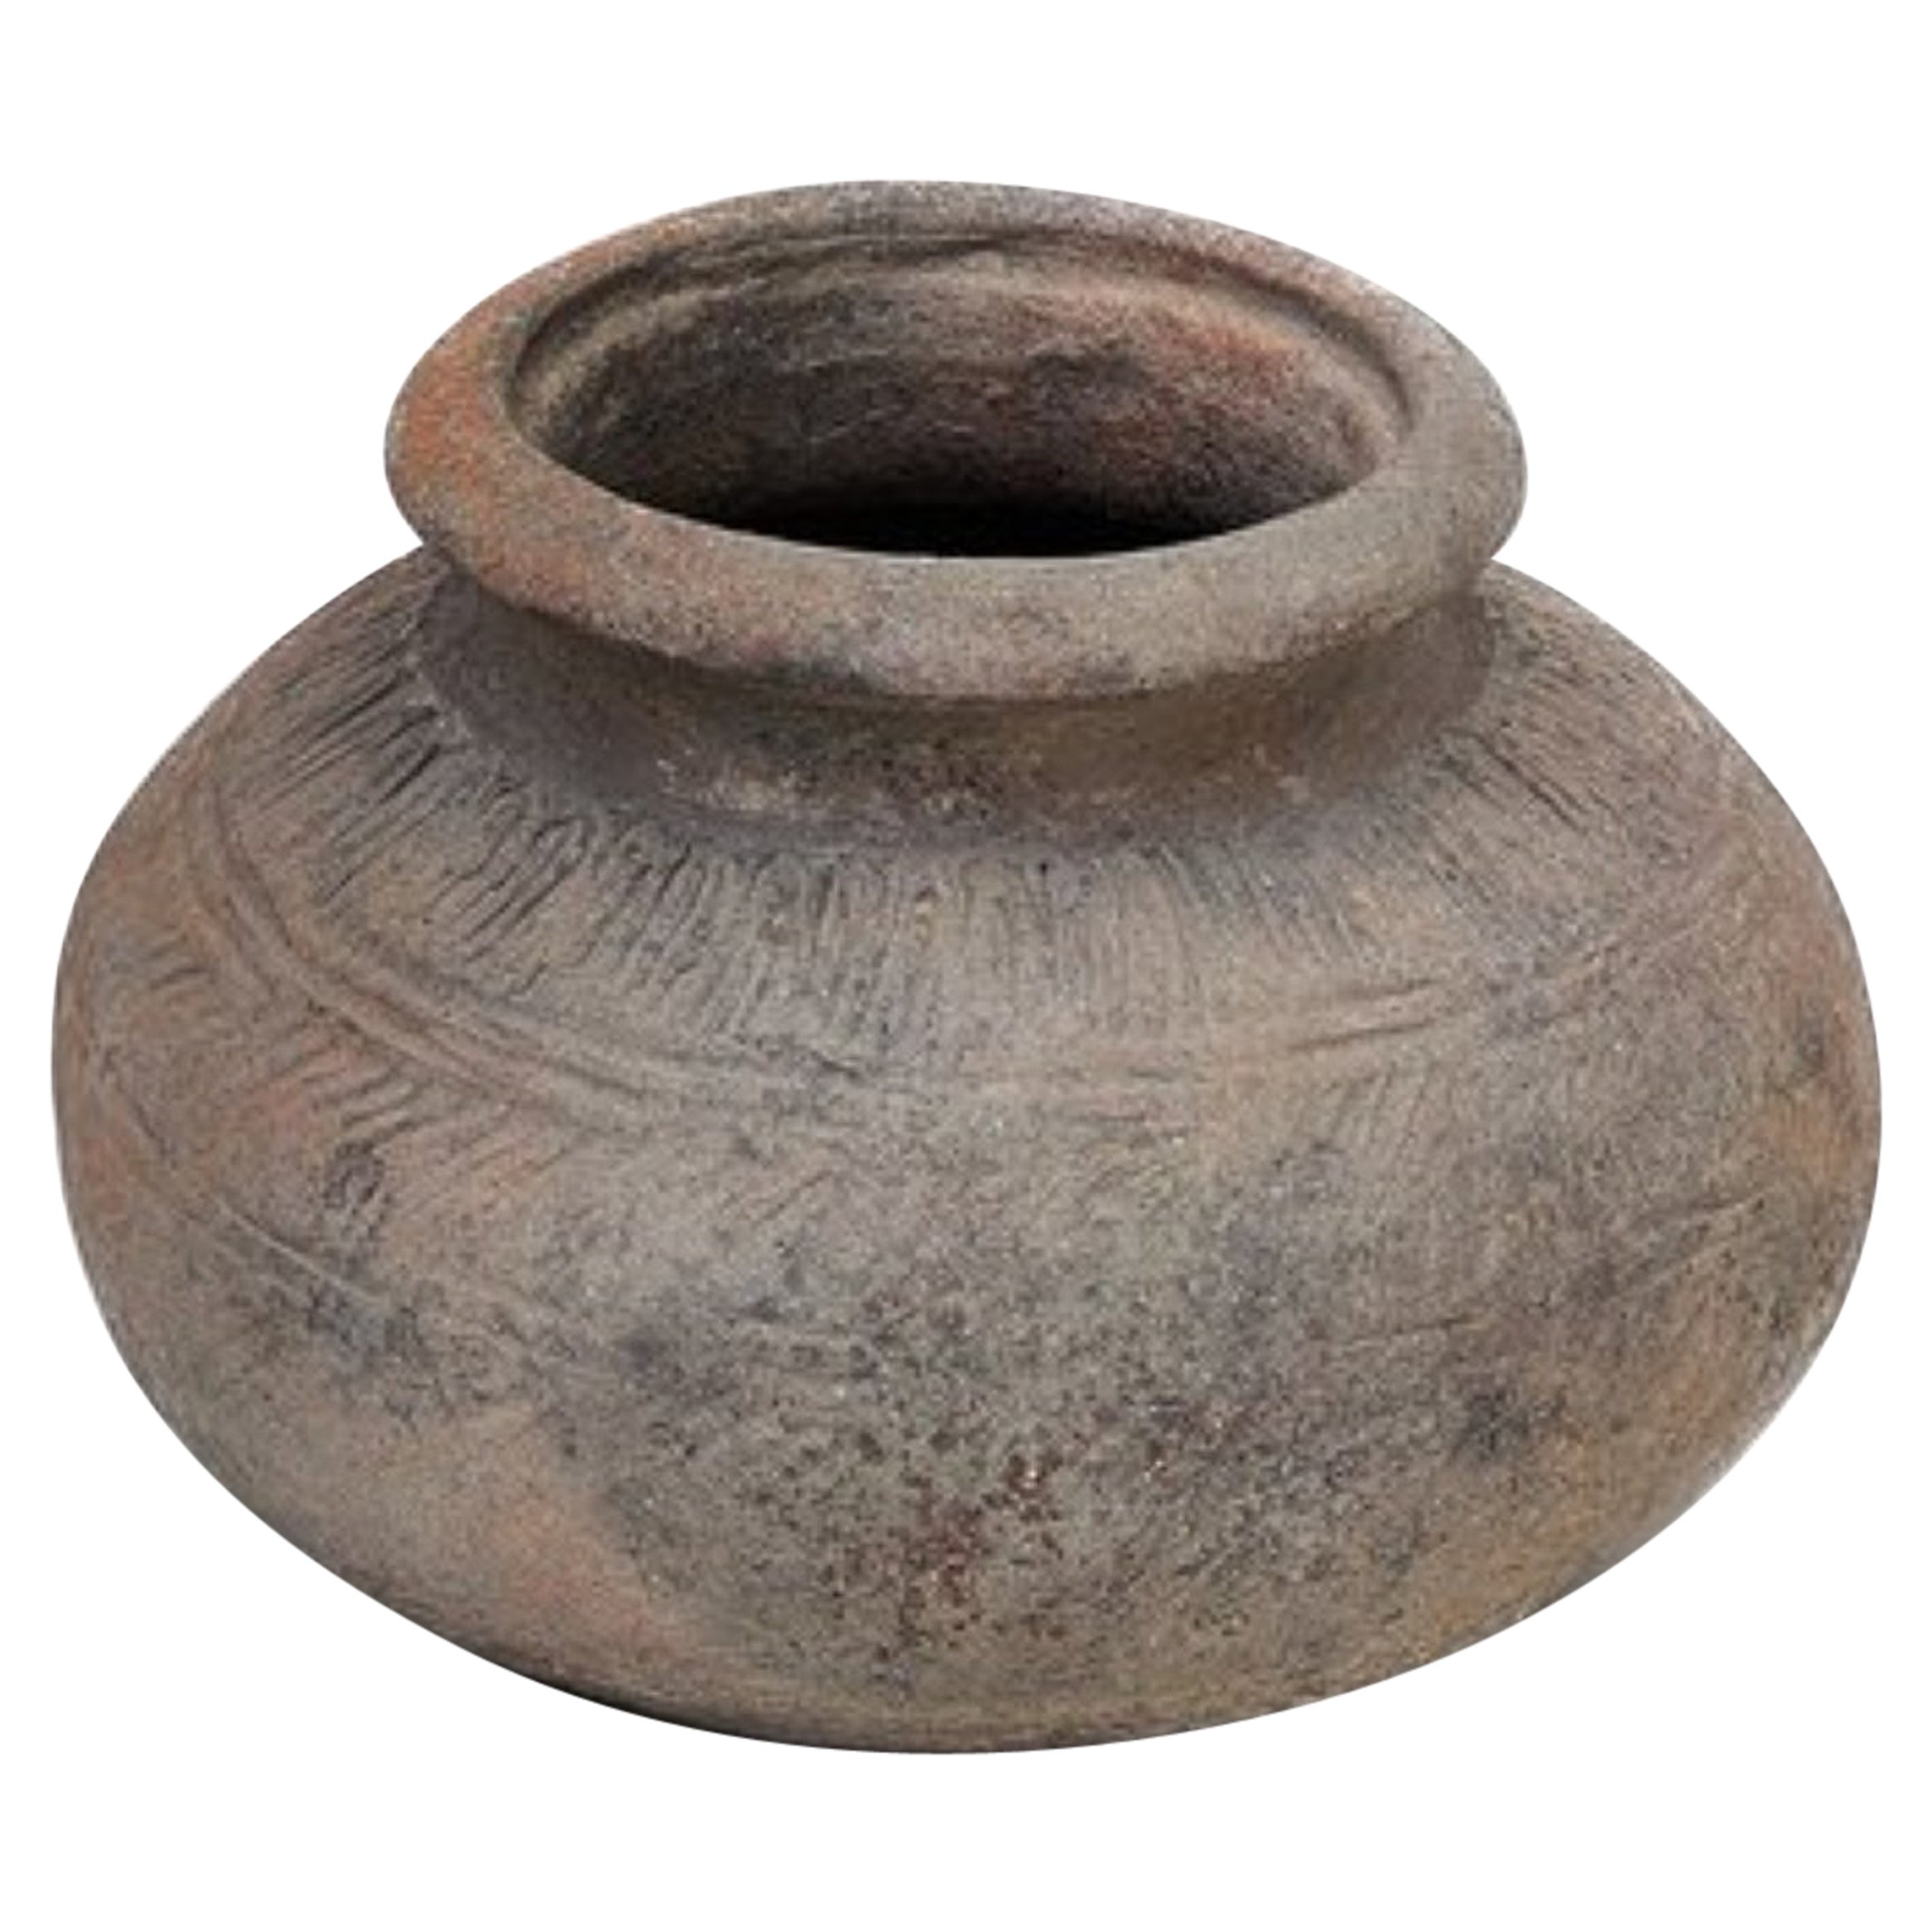 5.5" Ayutthaya Pottery For Sale